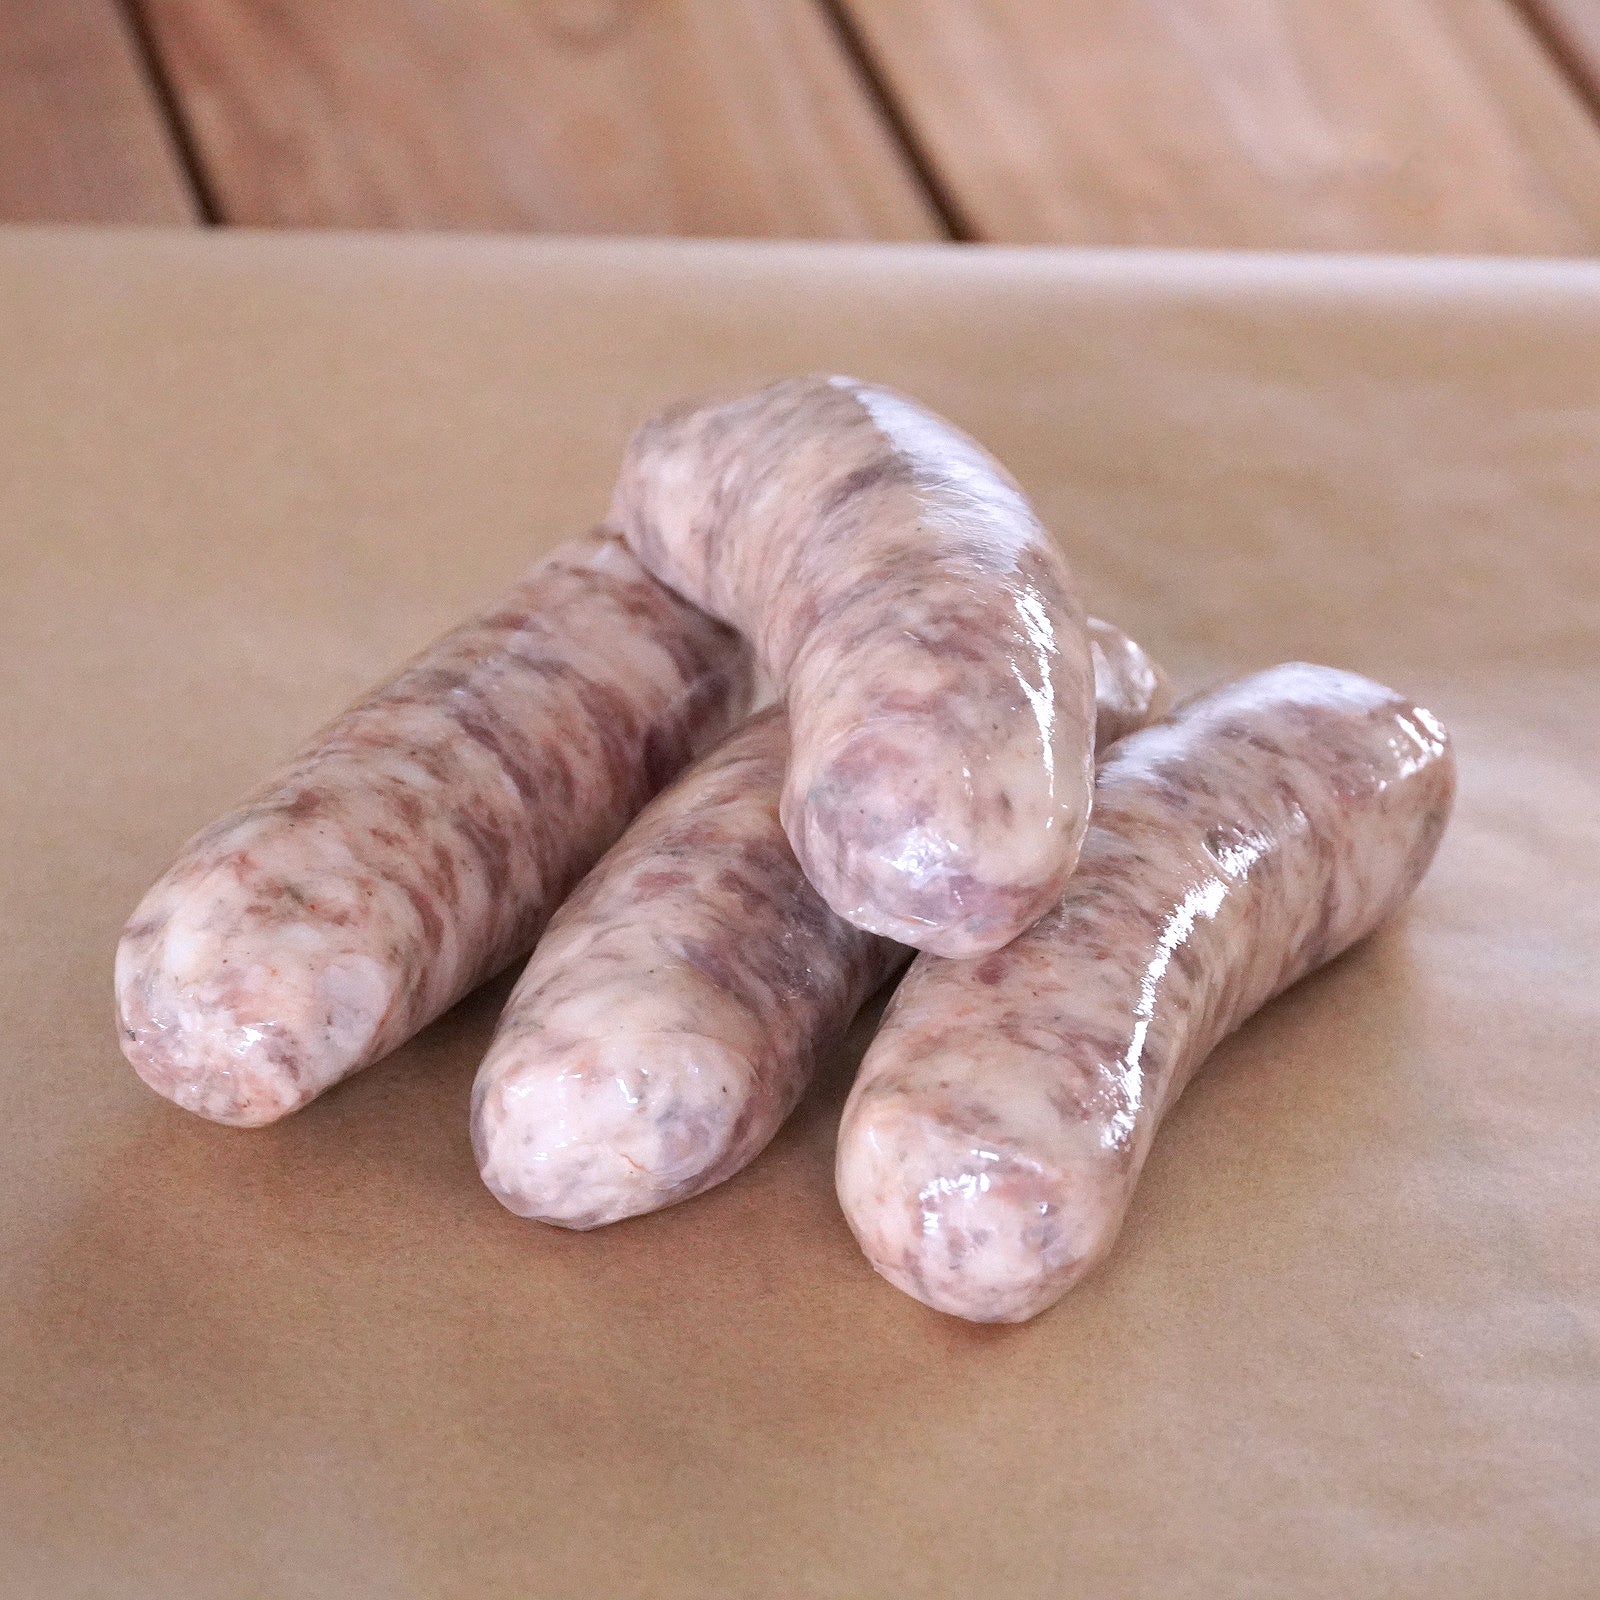 All-Natural Country Style Sausage (4pc) - Horizon Farms